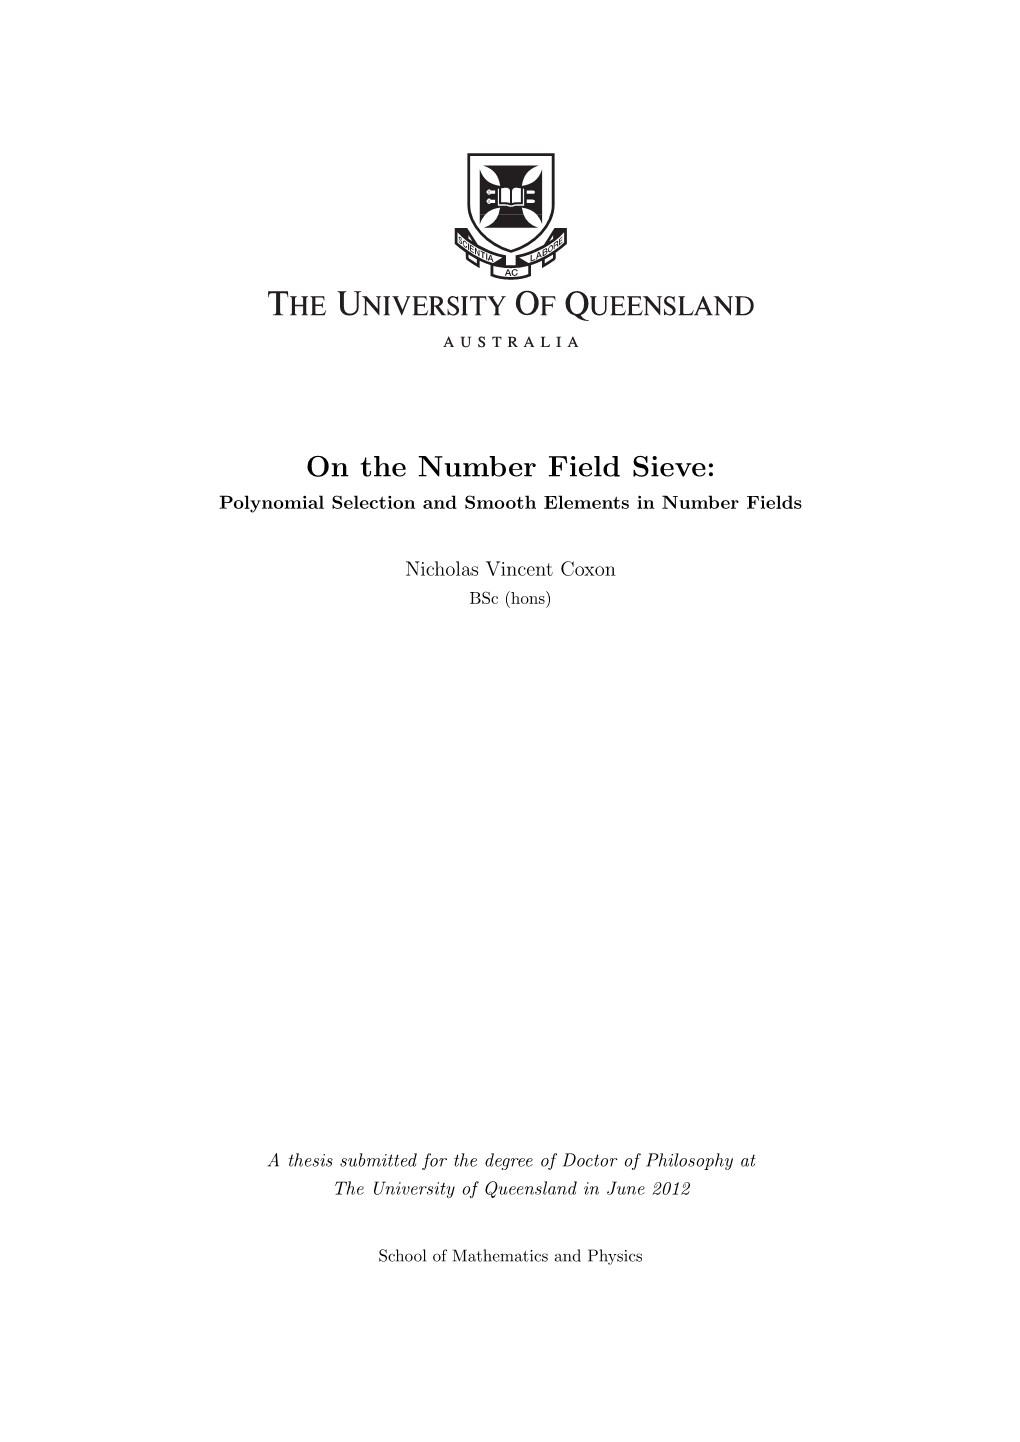 On the Number Field Sieve: Polynomial Selection and Smooth Elements in Number Fields